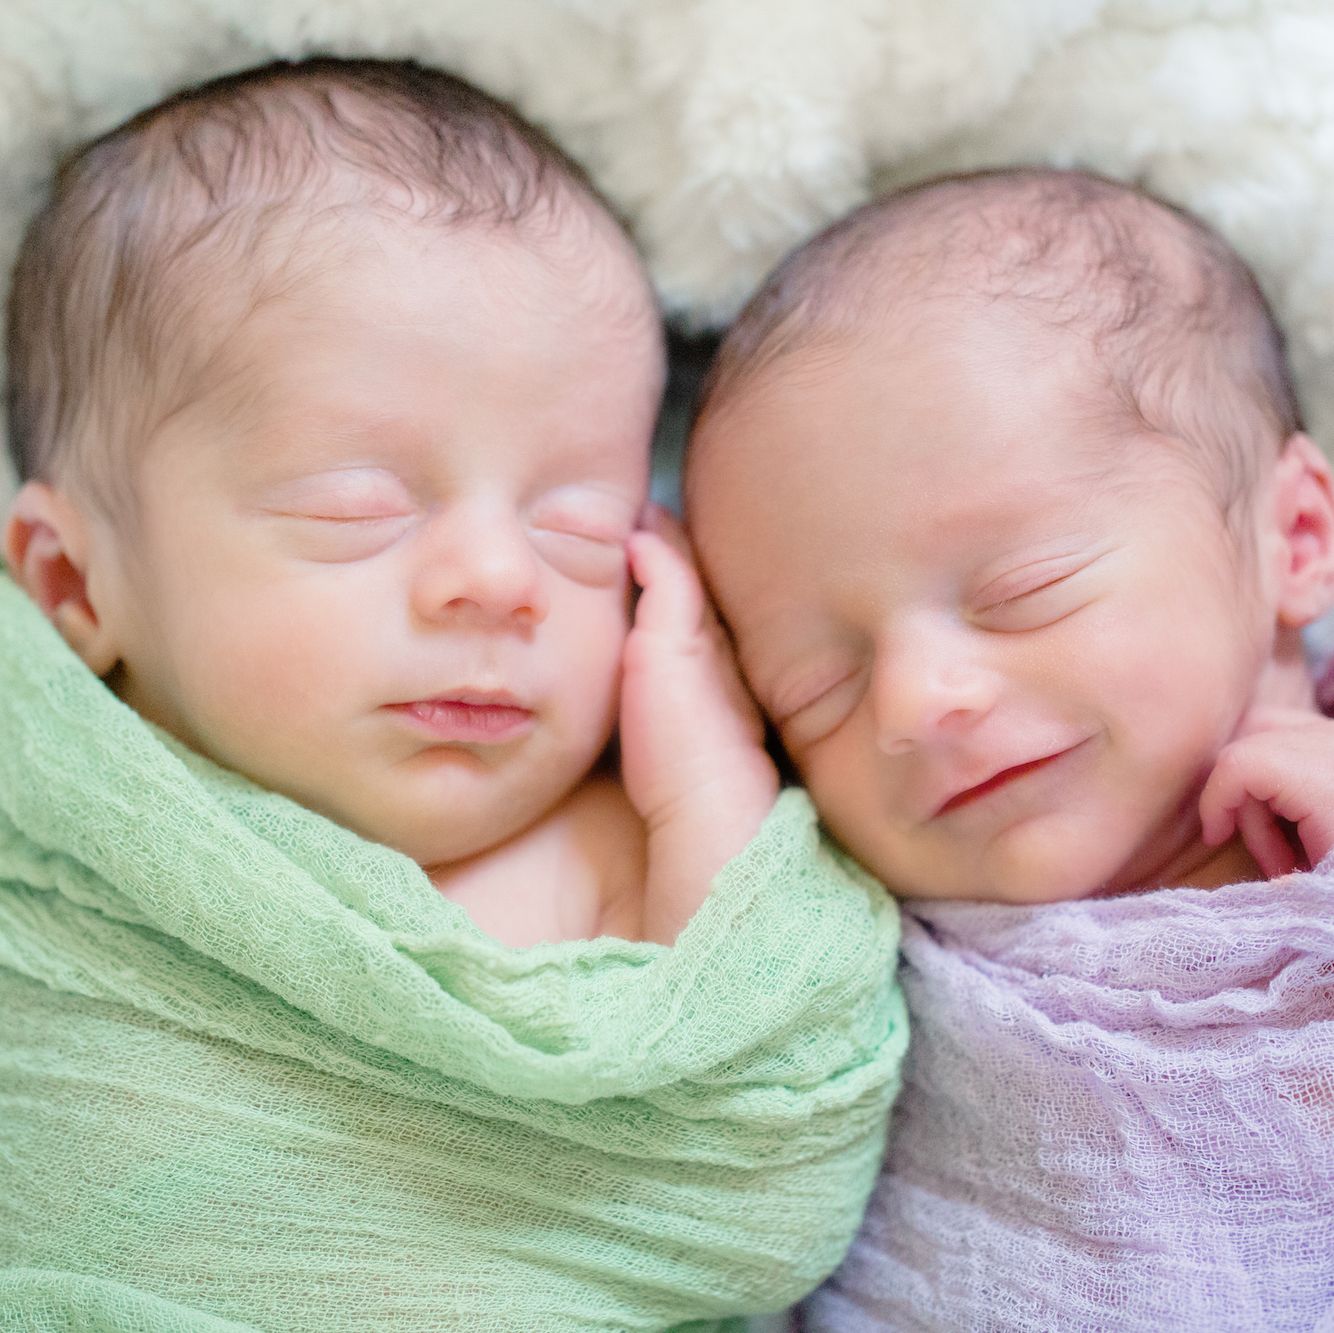 Twin names: baby names for twin girls, twin boys and mixed twins